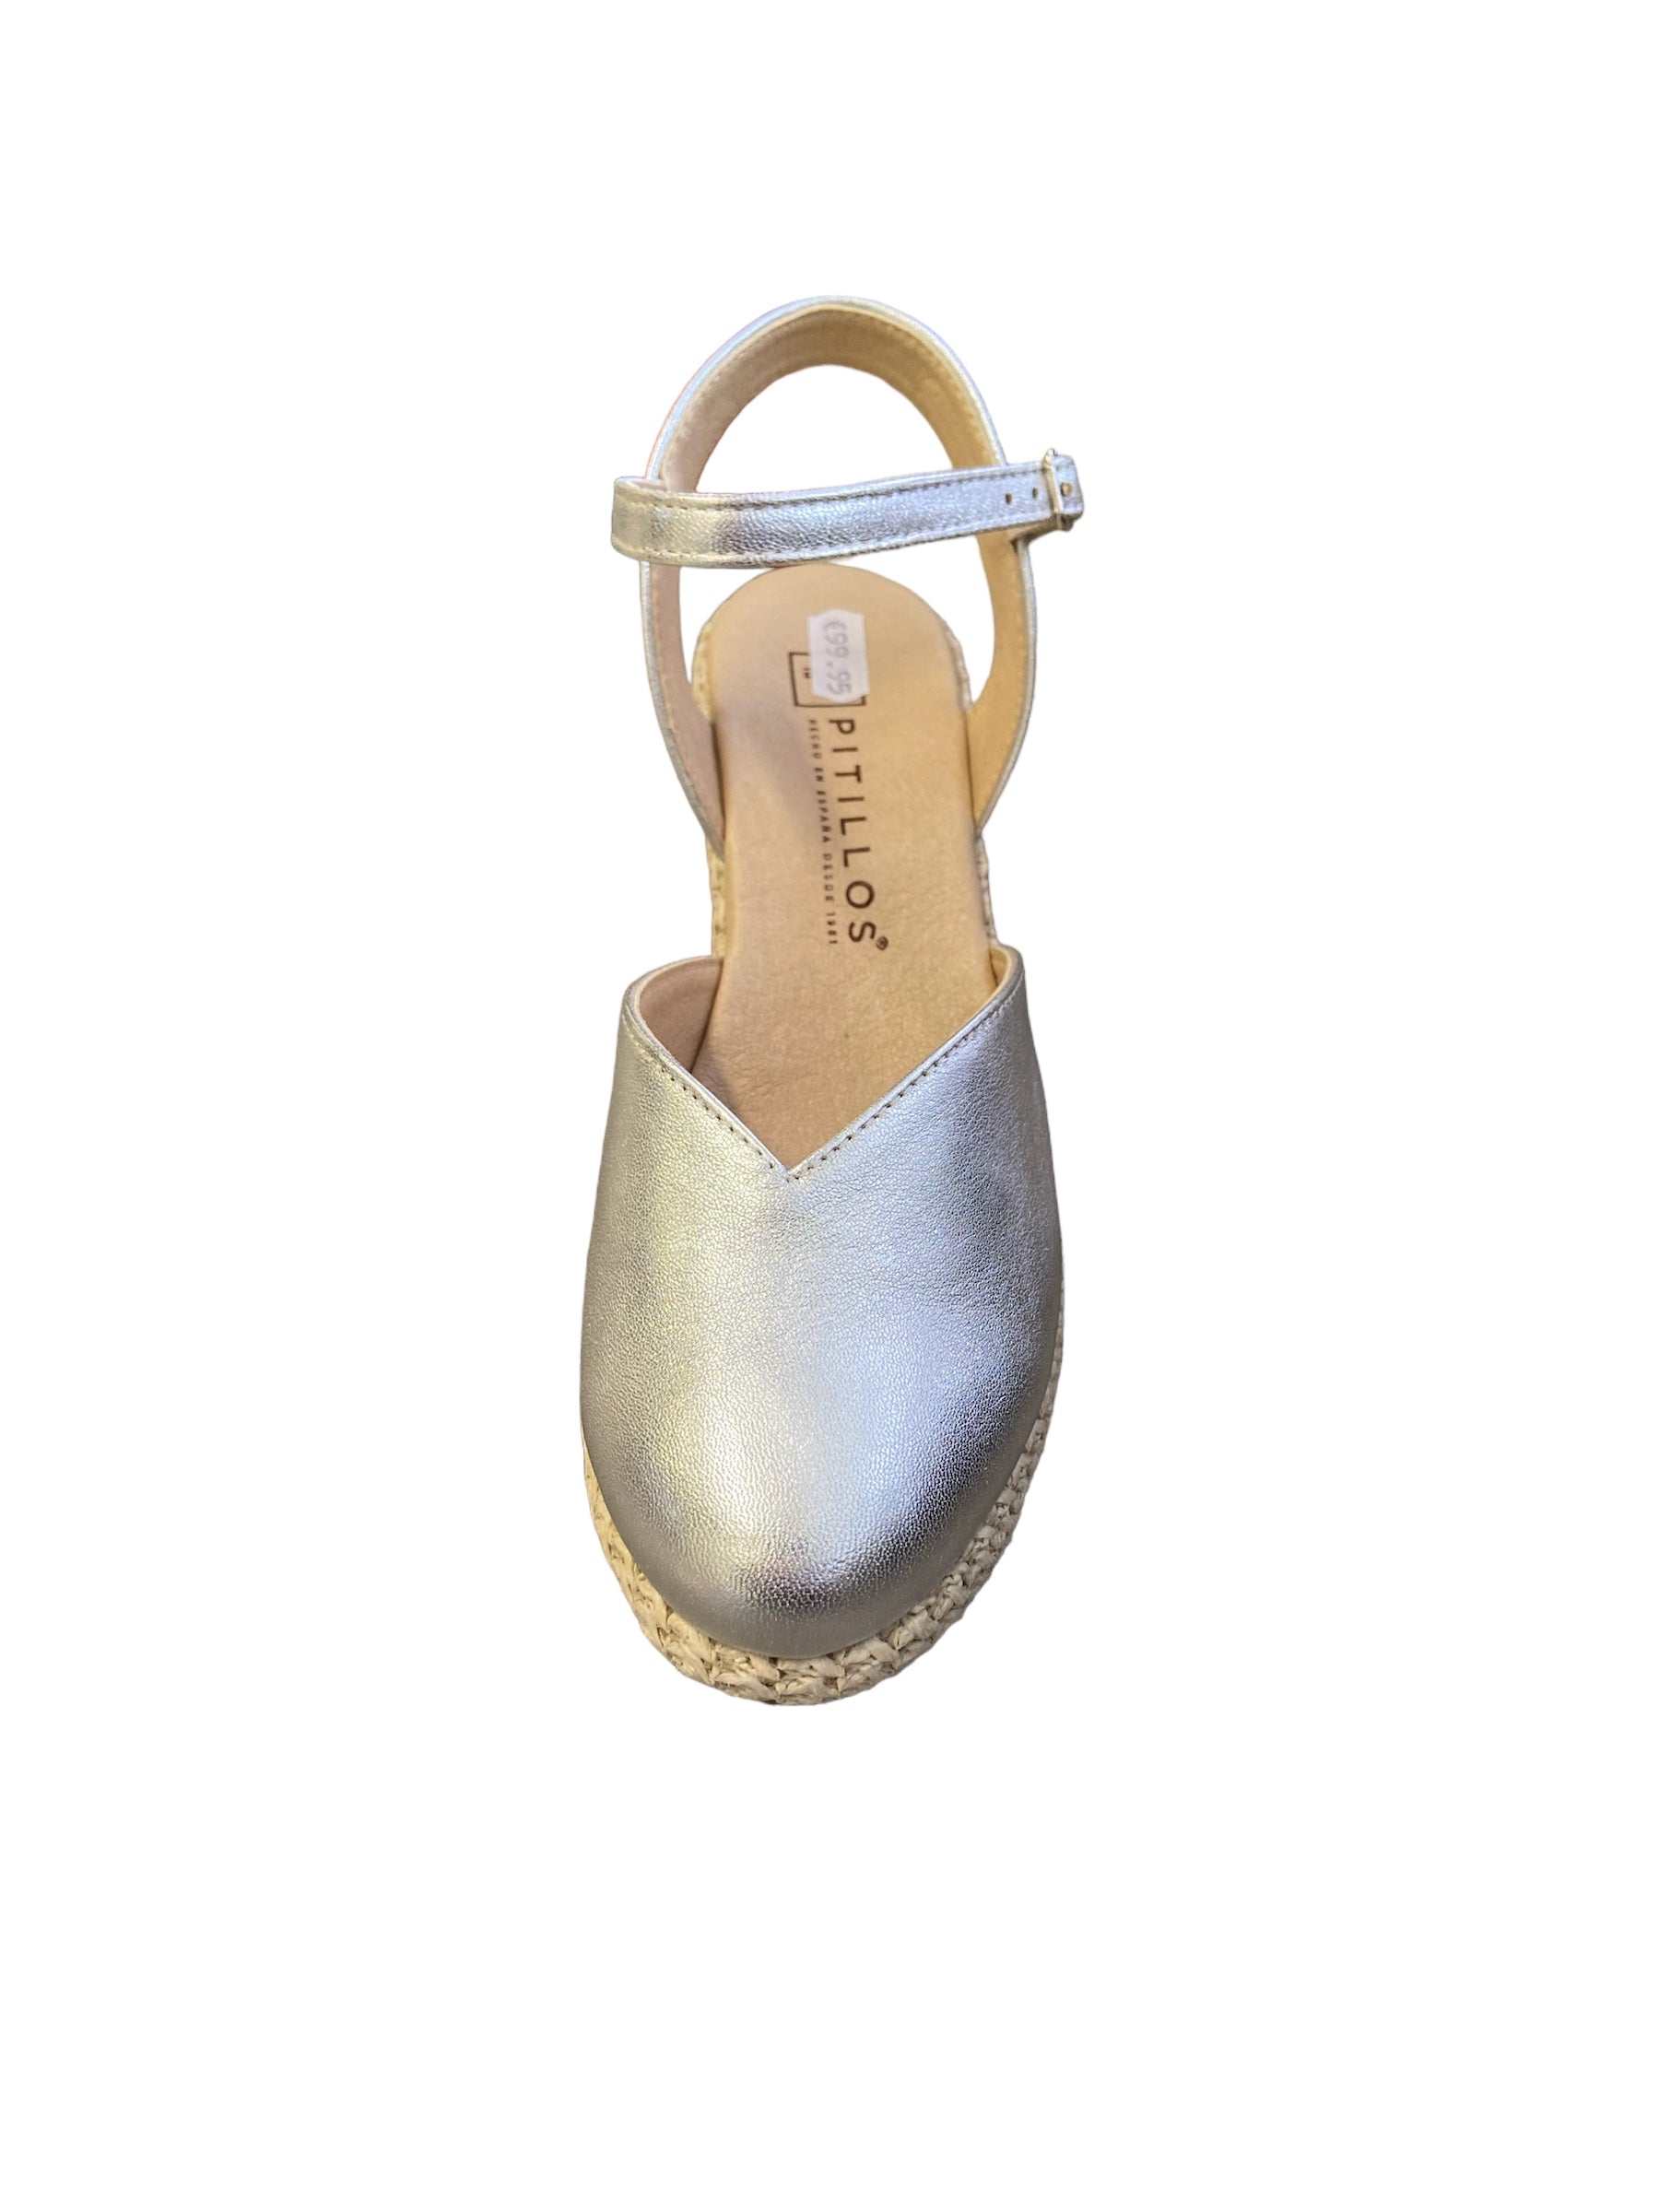 Pitillos Leather Espadrille Silver